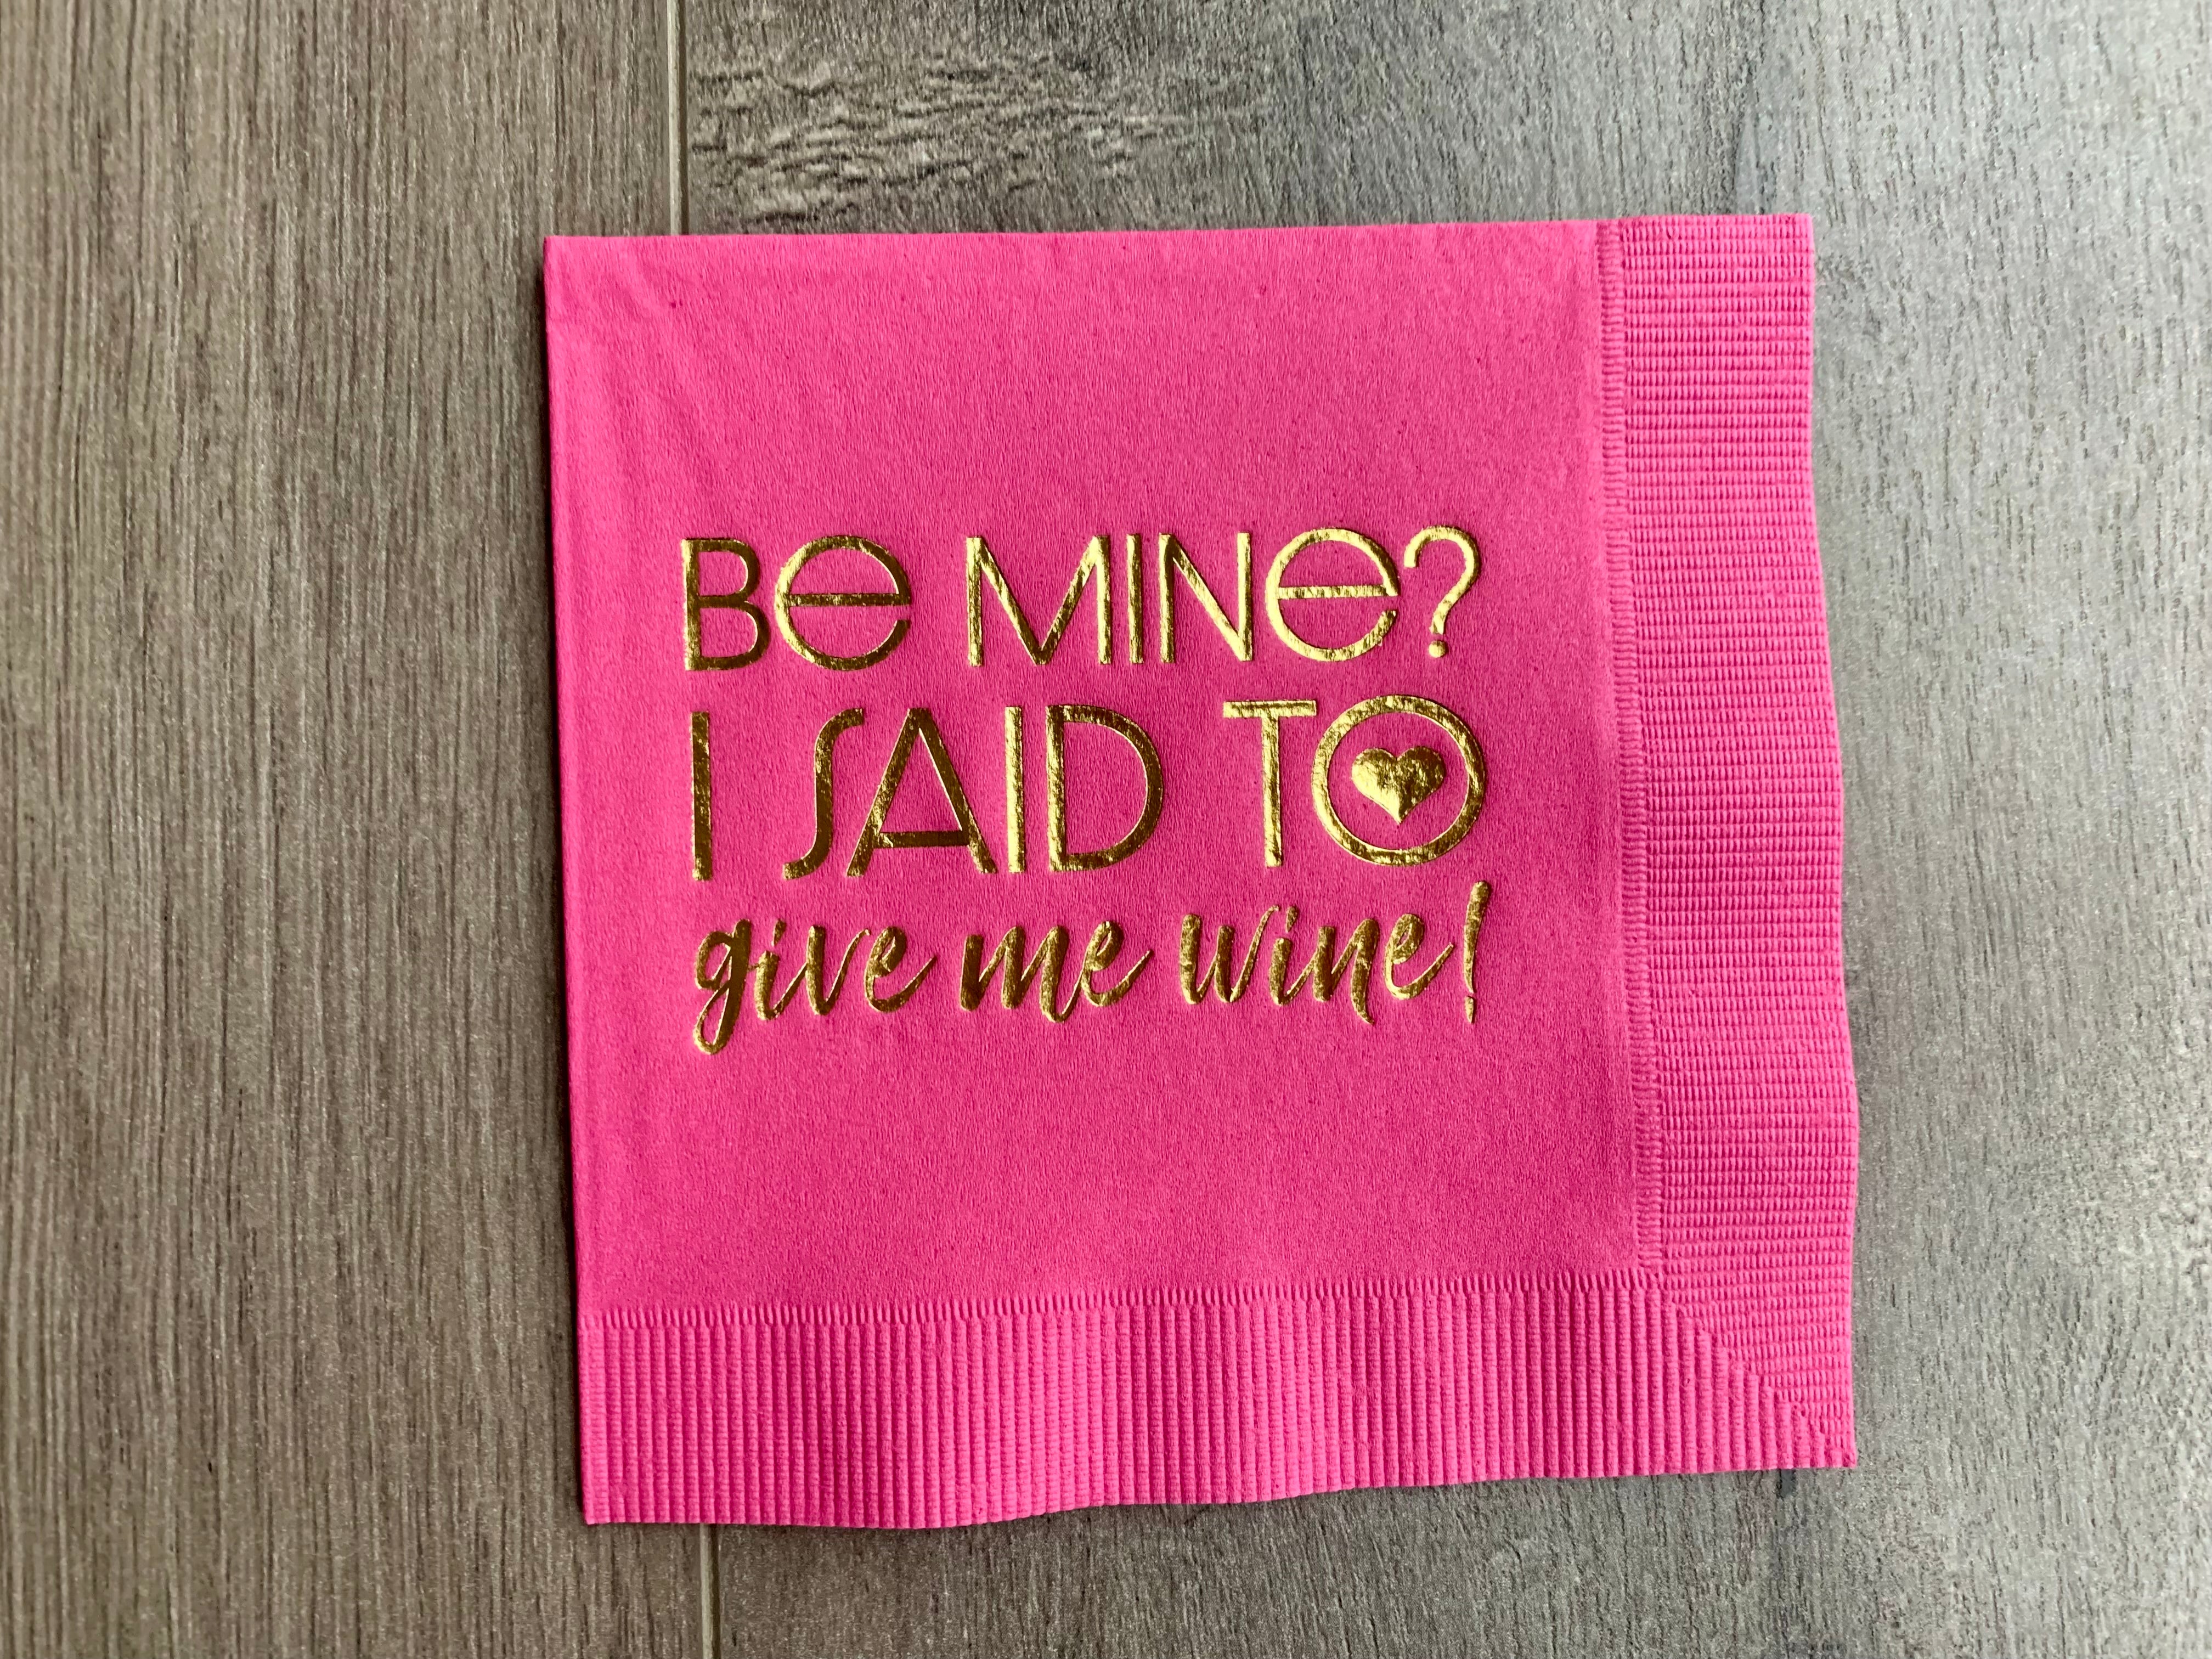 bright pink cocktail napkin with gold foil that says Be Mine? I said to give me wine! by Stationare, galentines day party, valentines day cocktail napkin